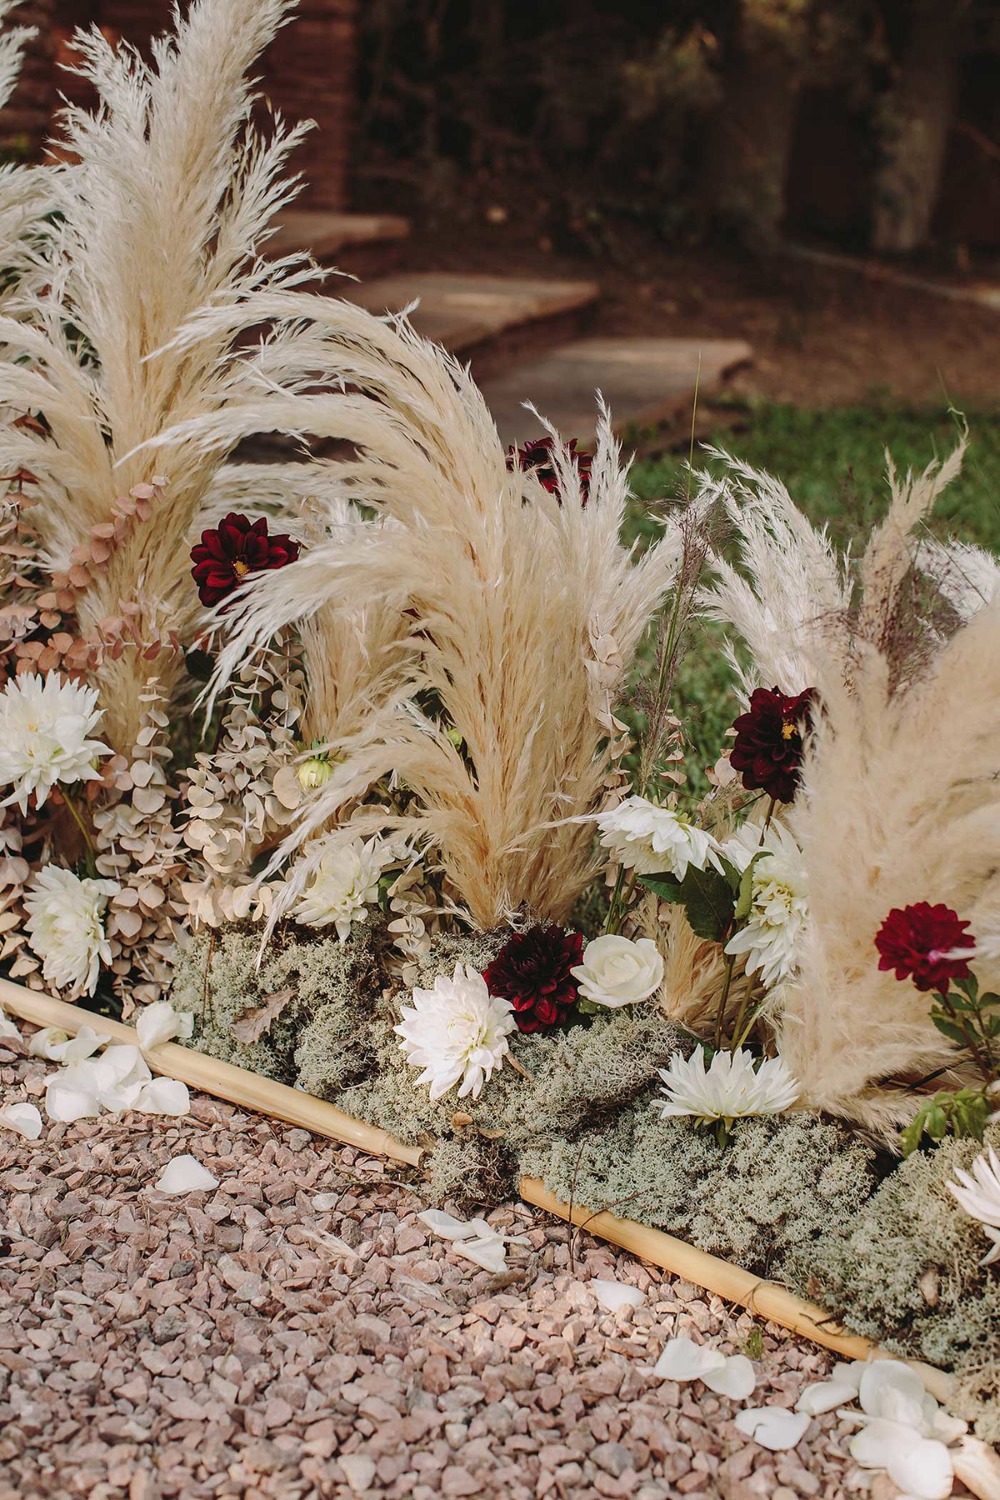 Looking For Fall Glam Wedding Ideas? This Wedding Is It!